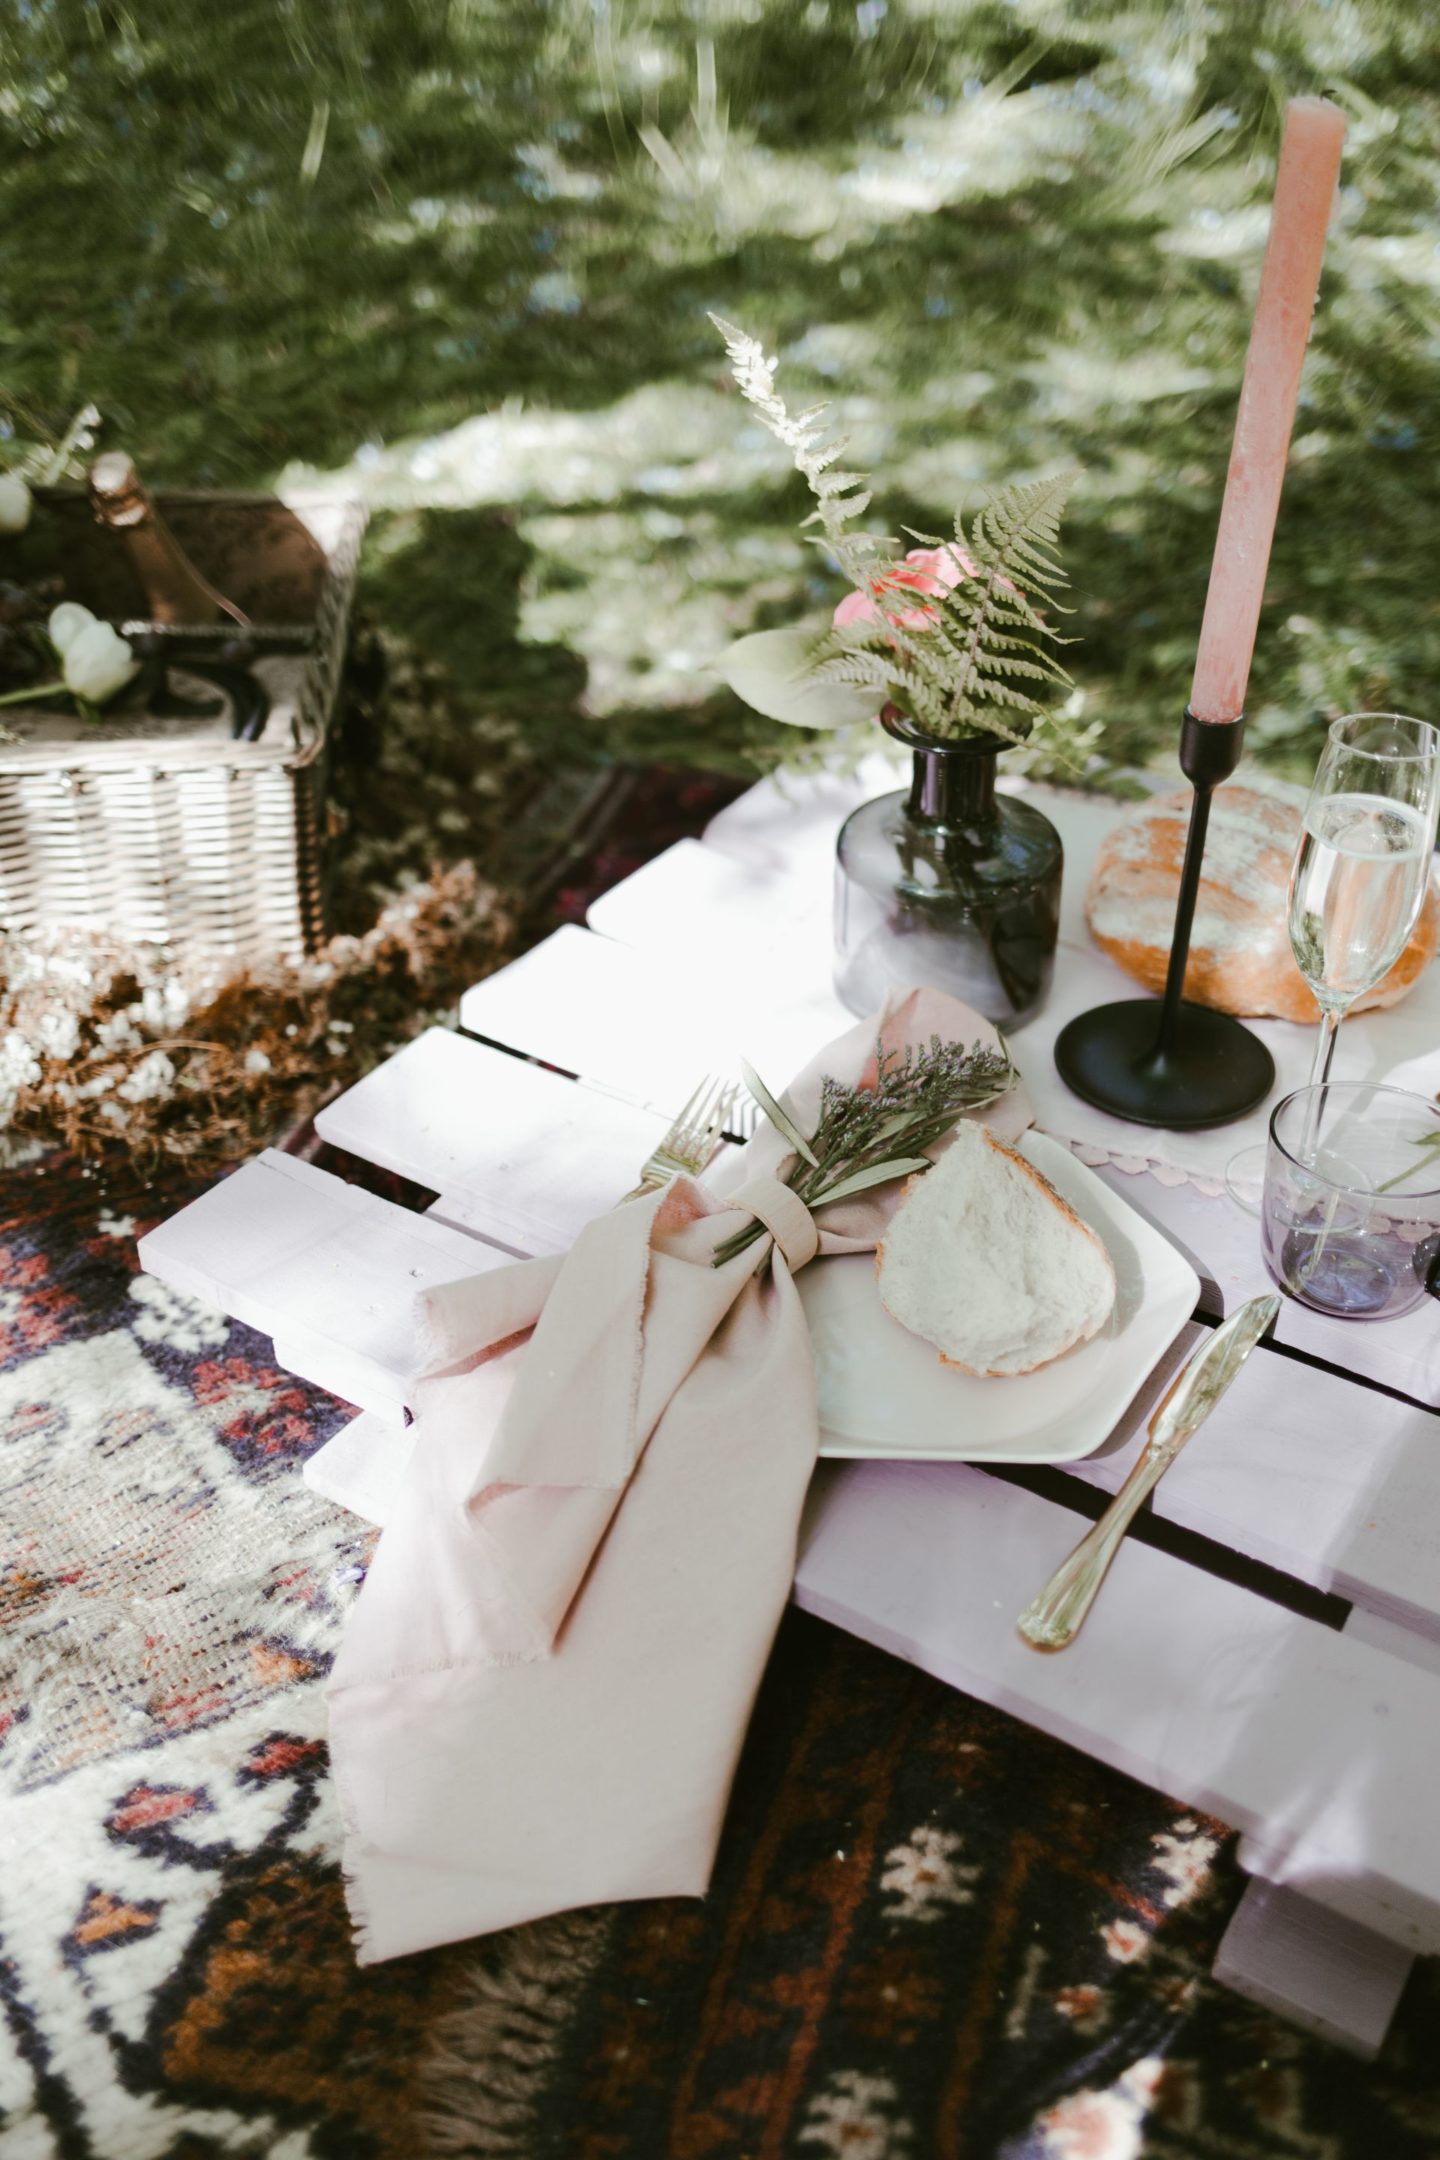 Boho Chic Festival Picnic Wedding With Eclectic Styling